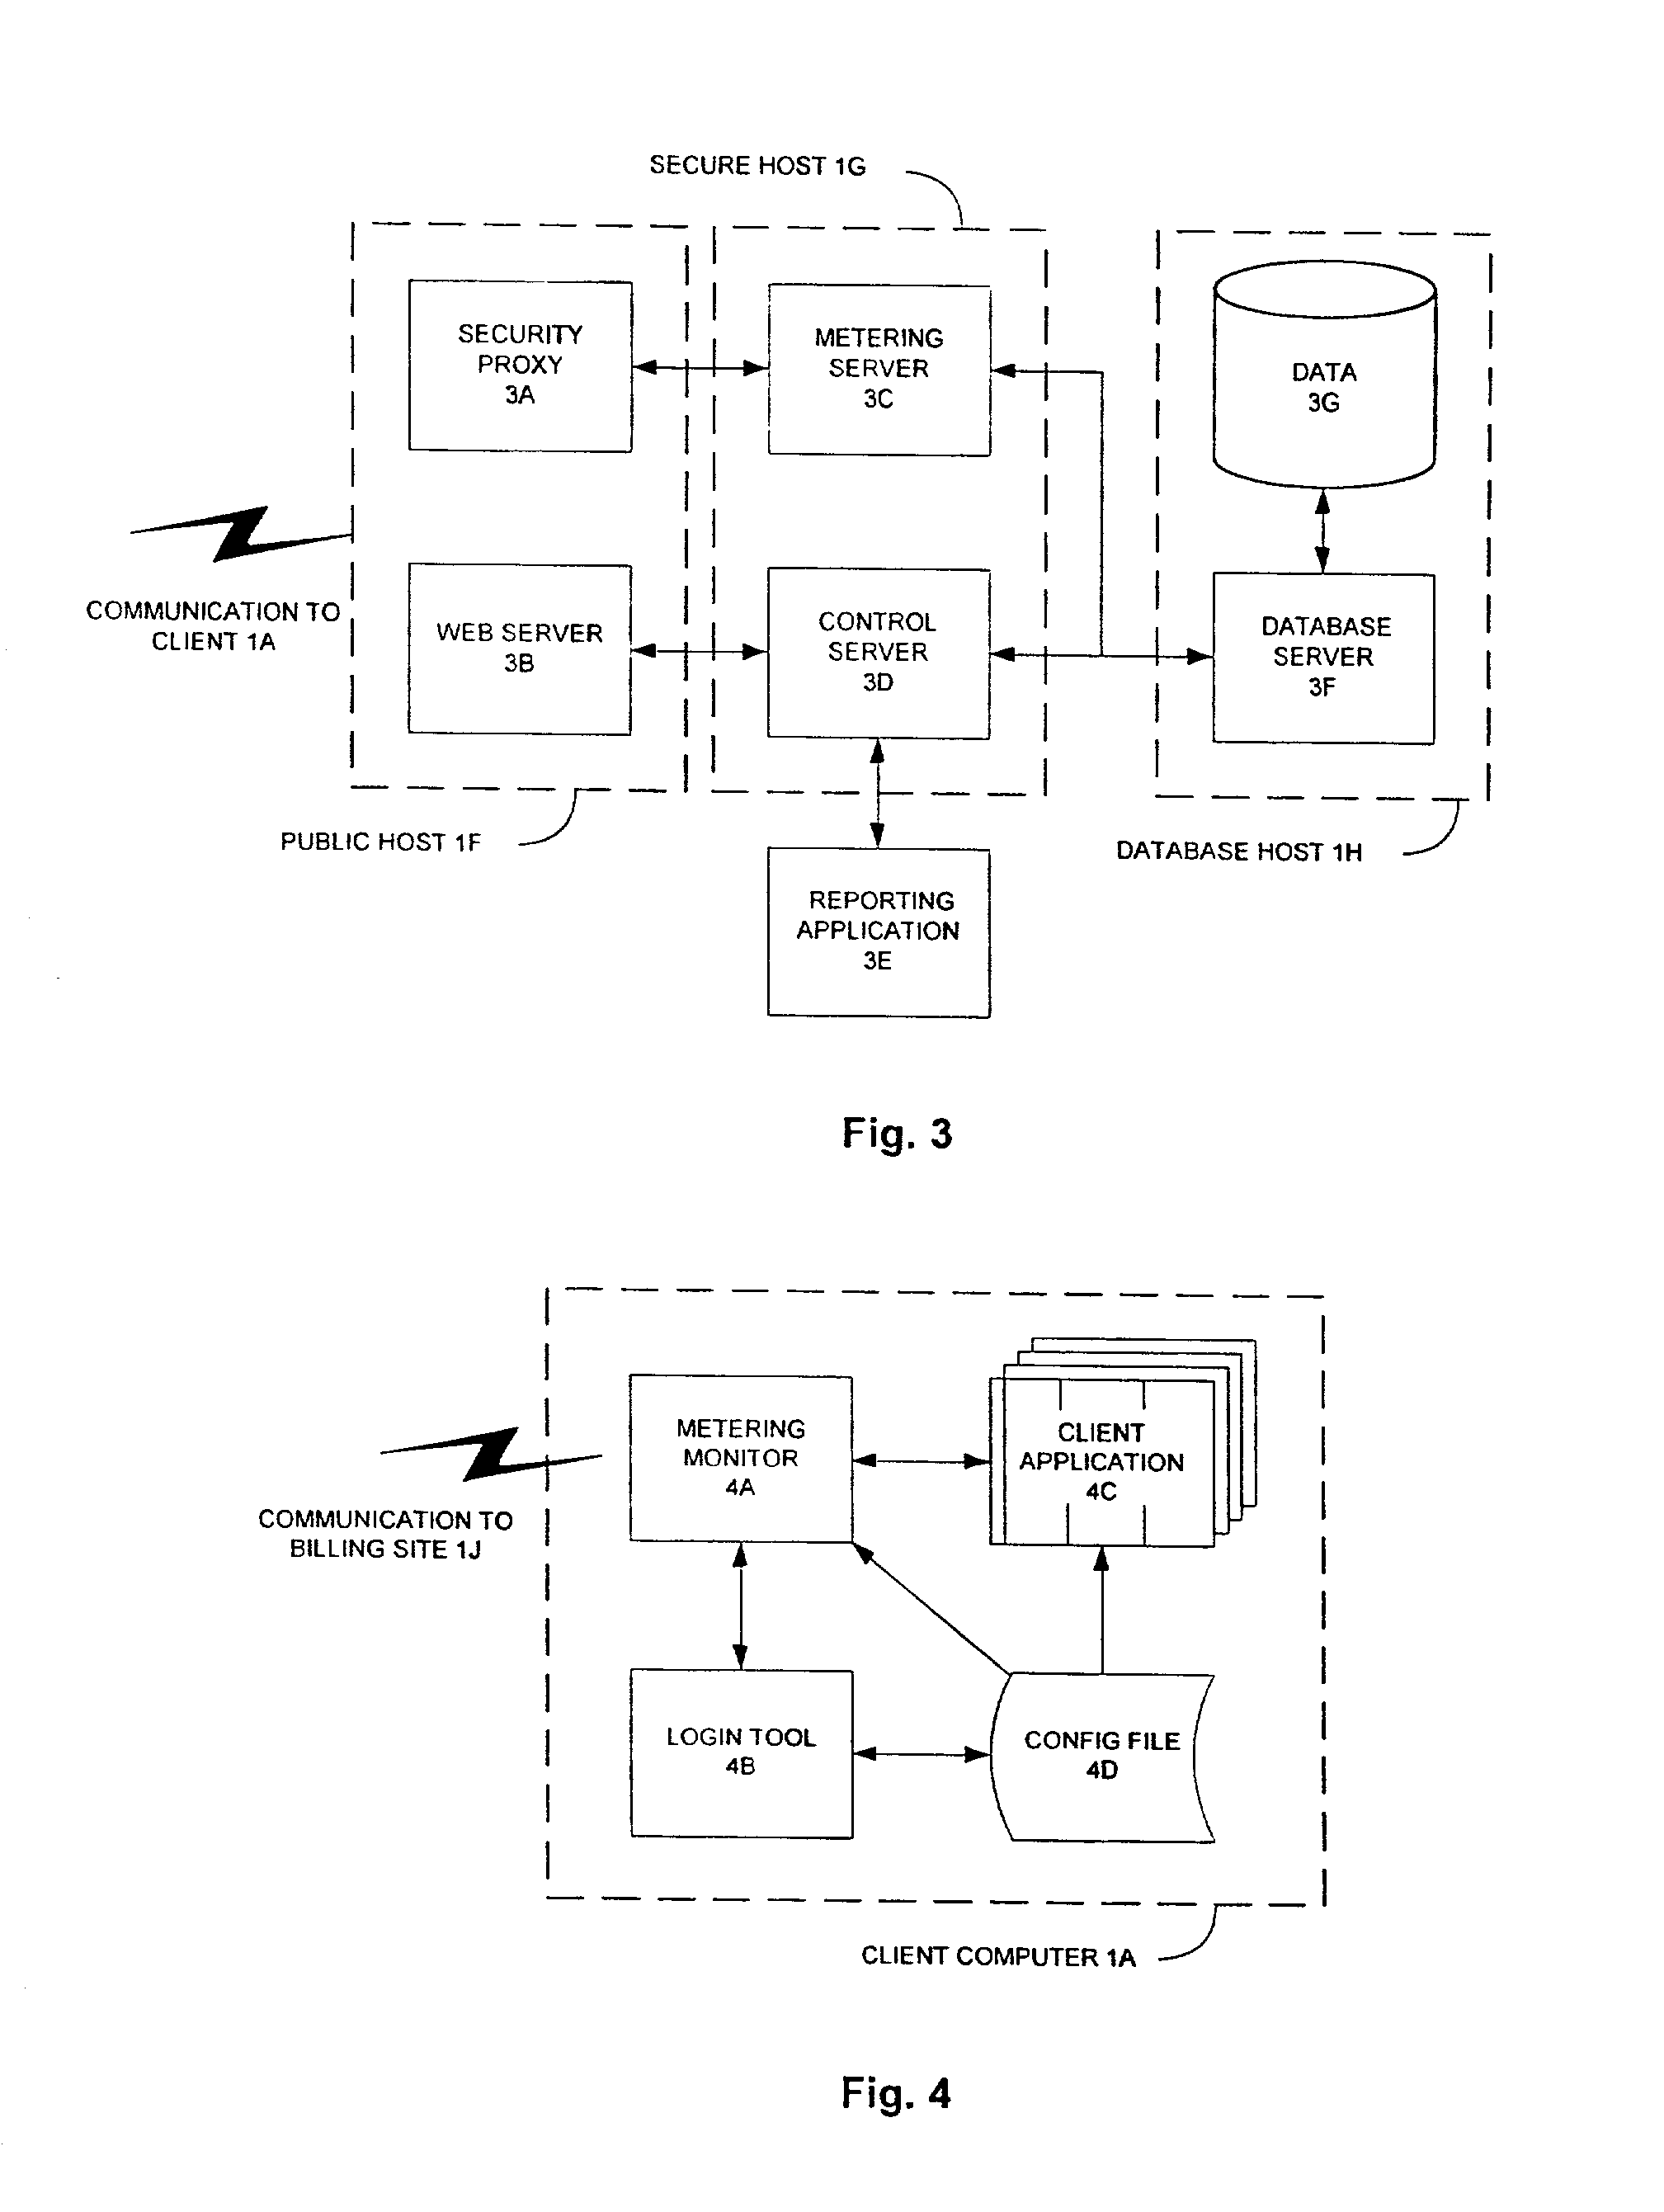 Method and apparatus for the accurate metering of software application usage and the reporting of such usage to a remote site on a public network